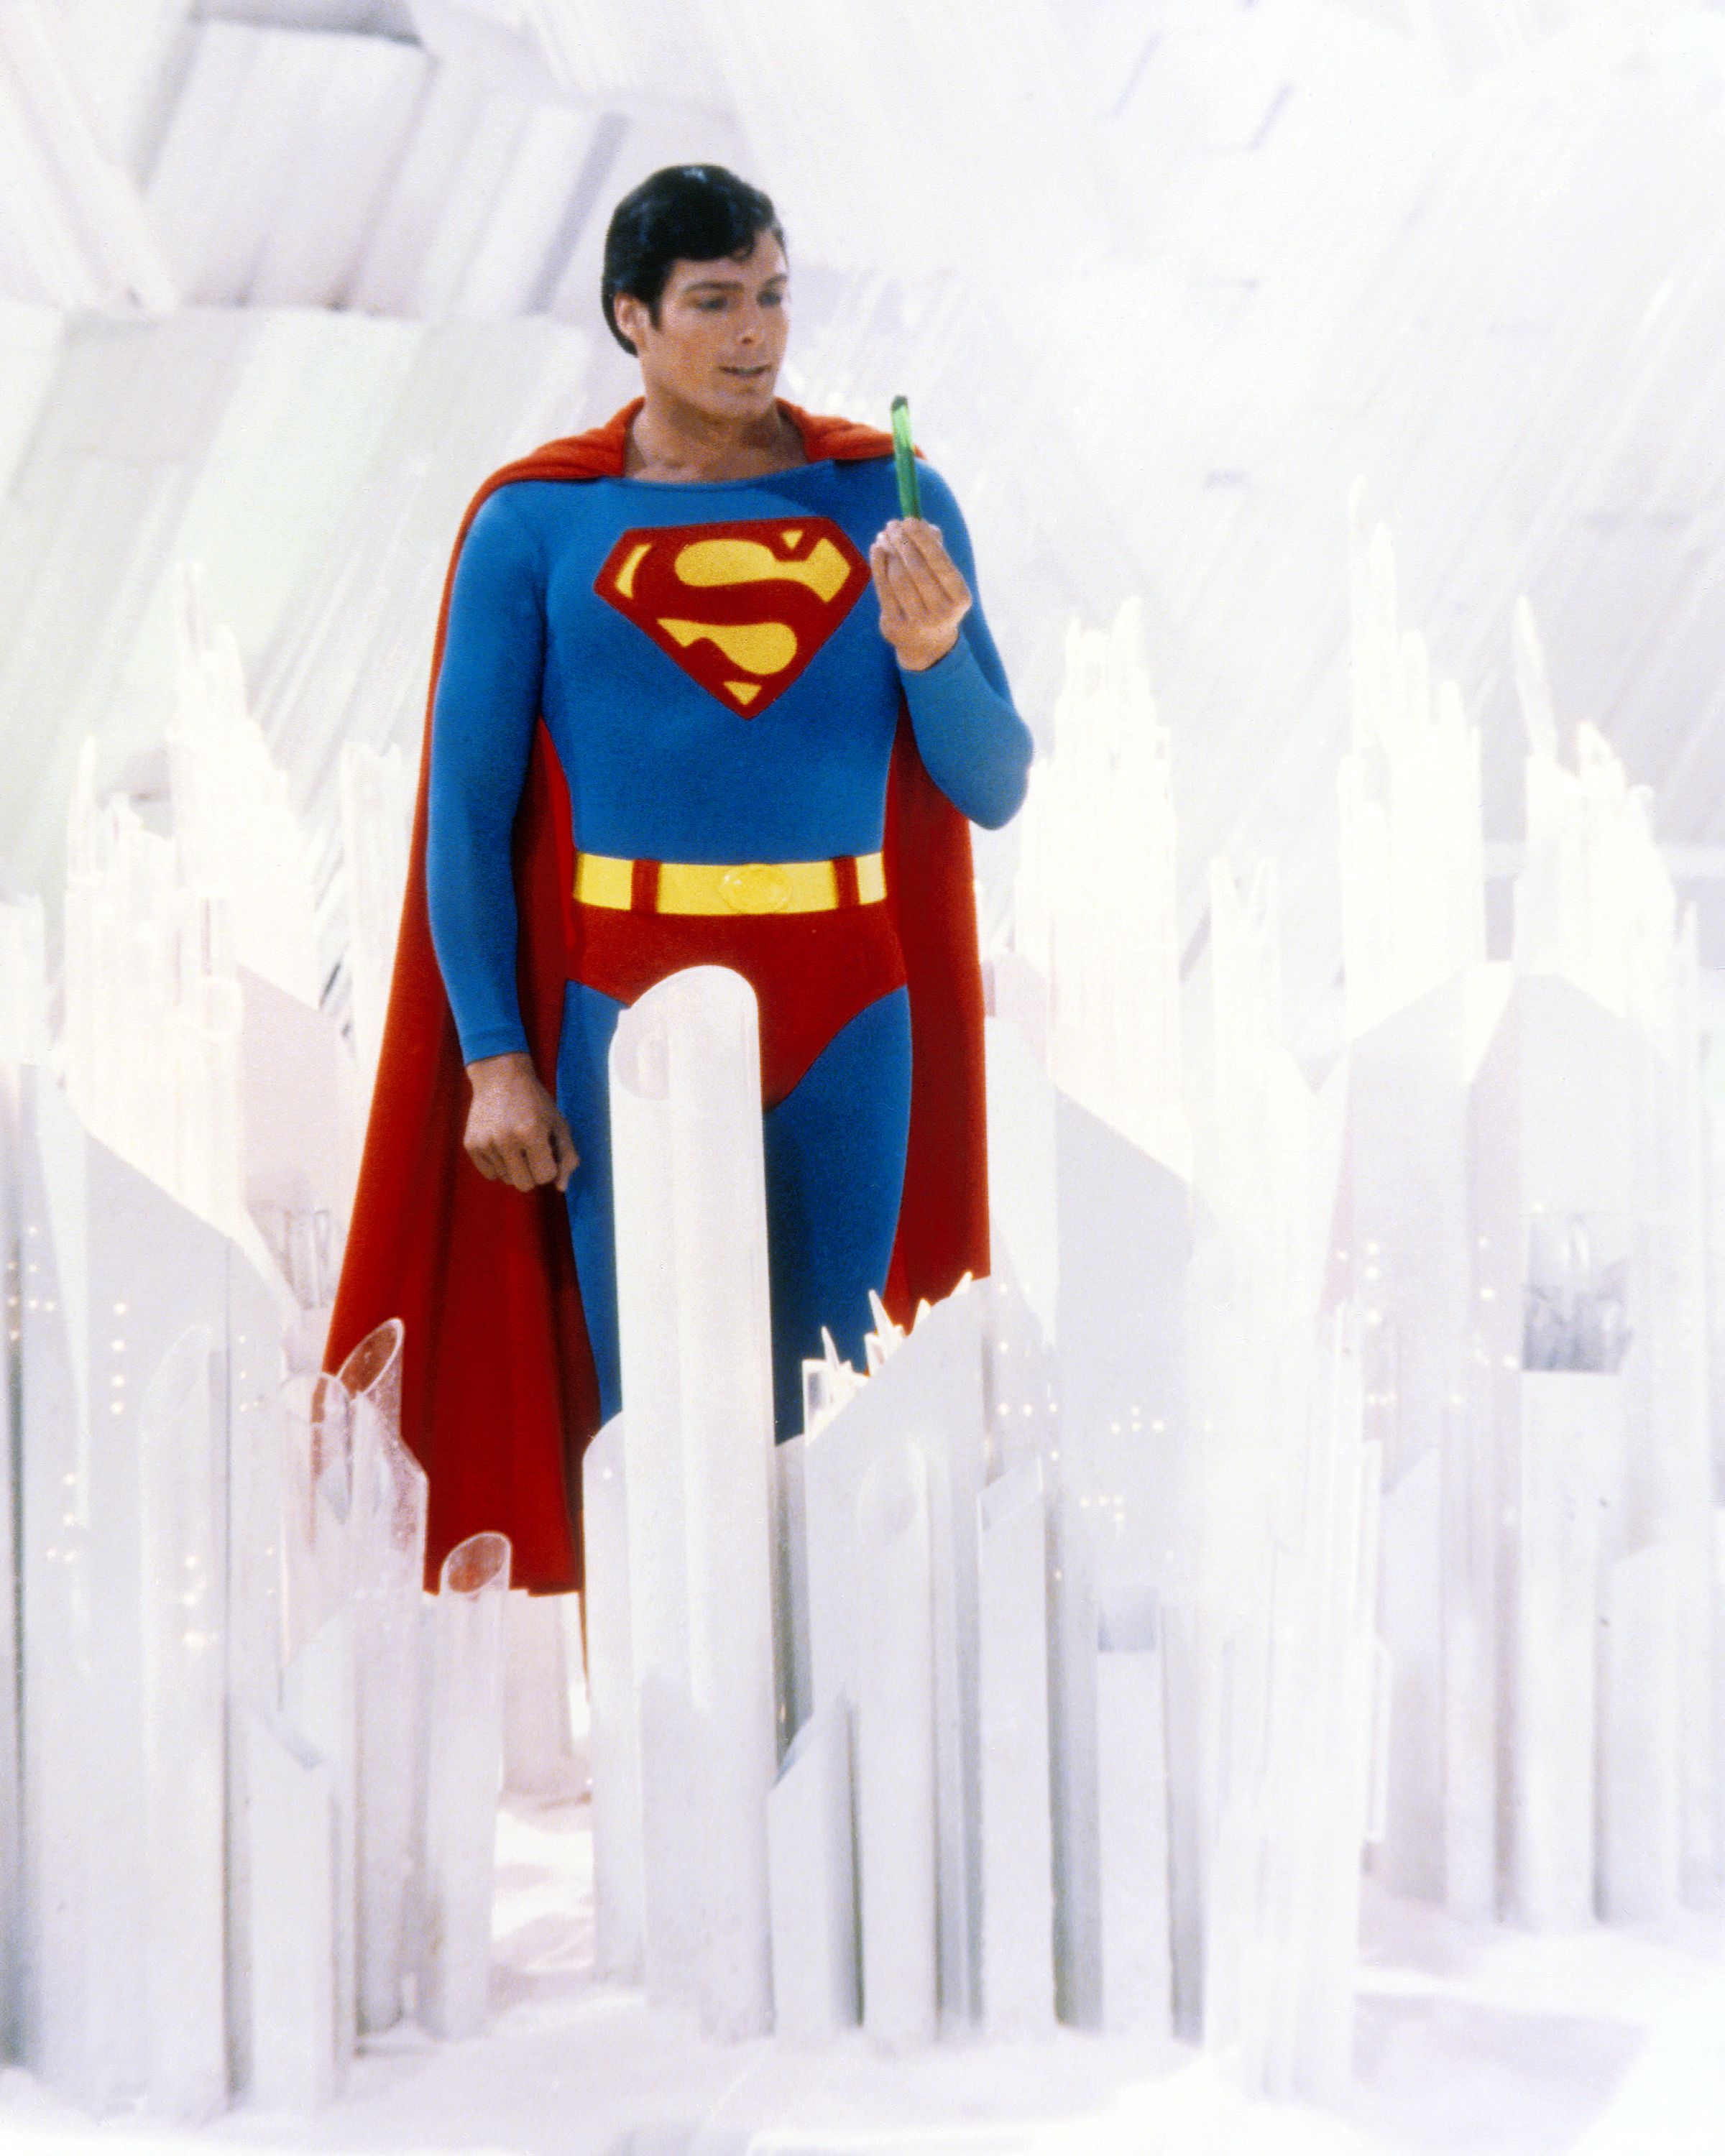 Superman, played by American actor Christopher Reeve holds a green crystal at the Fortress of Solitude in a promotional still from "Superman"1978 | Source: Getty Images